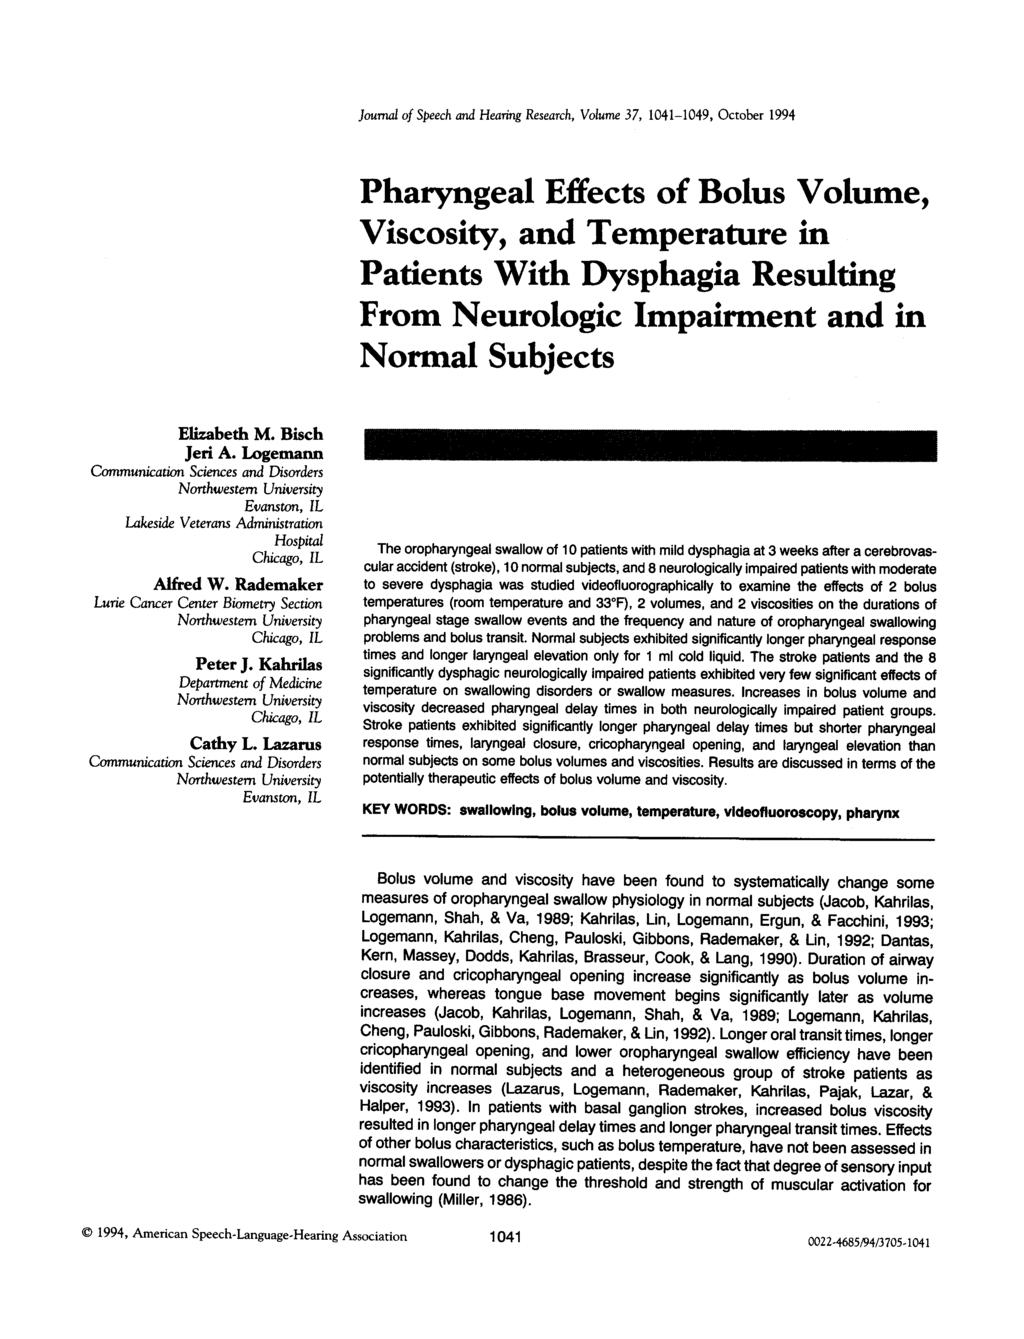 Journal of Speech and Hearing Research, Volume 37, 1041-1049, October 1994 Pharyngeal Effects of Bolus Volume, Viscosity, and Temperature in Patients With Dysphagia Resulting From Neurologic